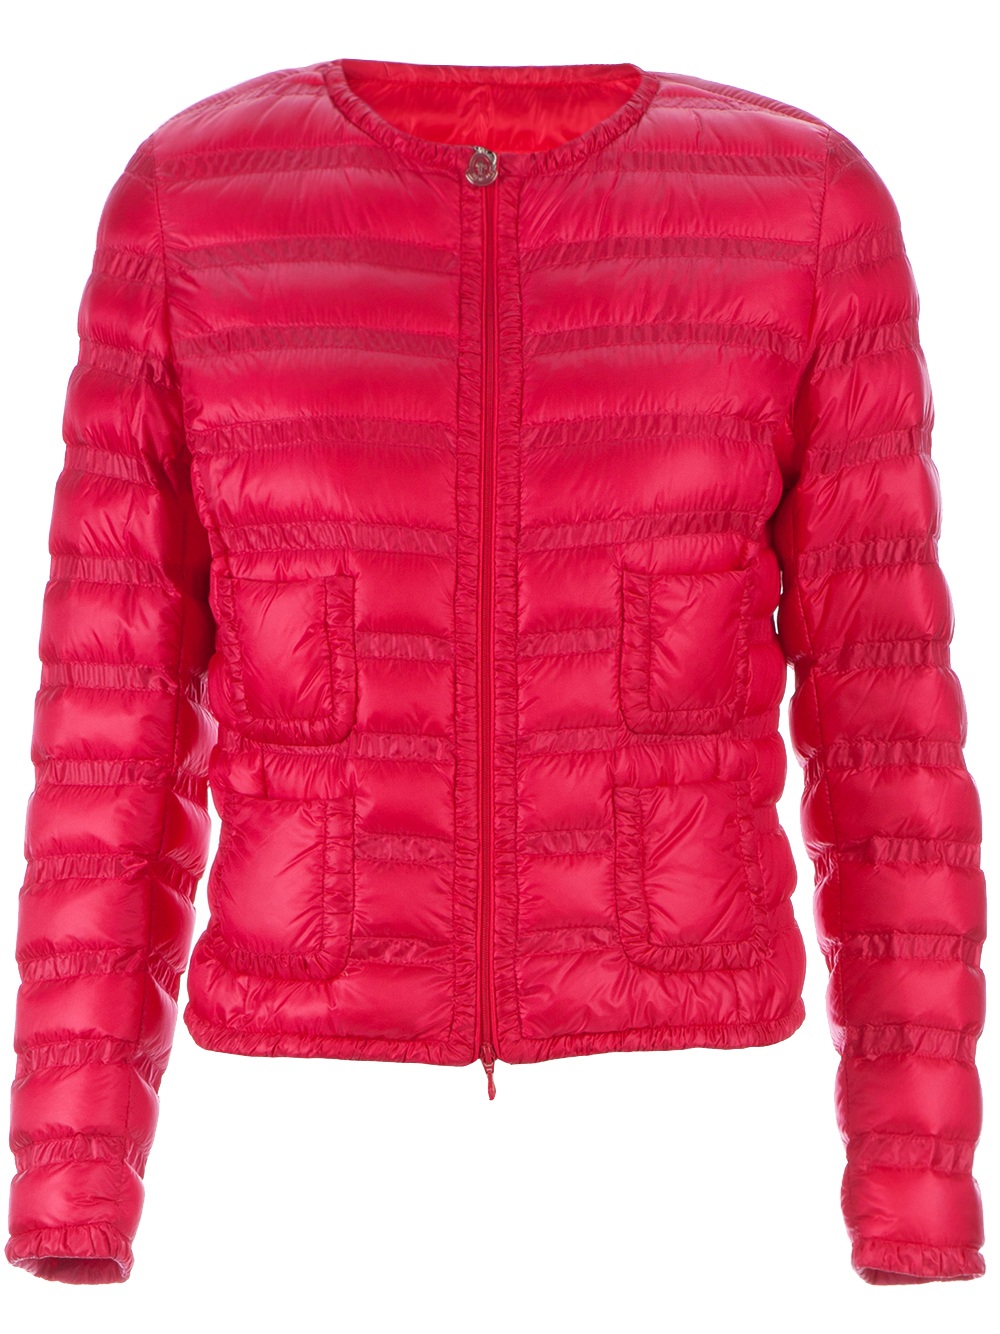 Lyst - Moncler Lissy Padded Jacket in Pink